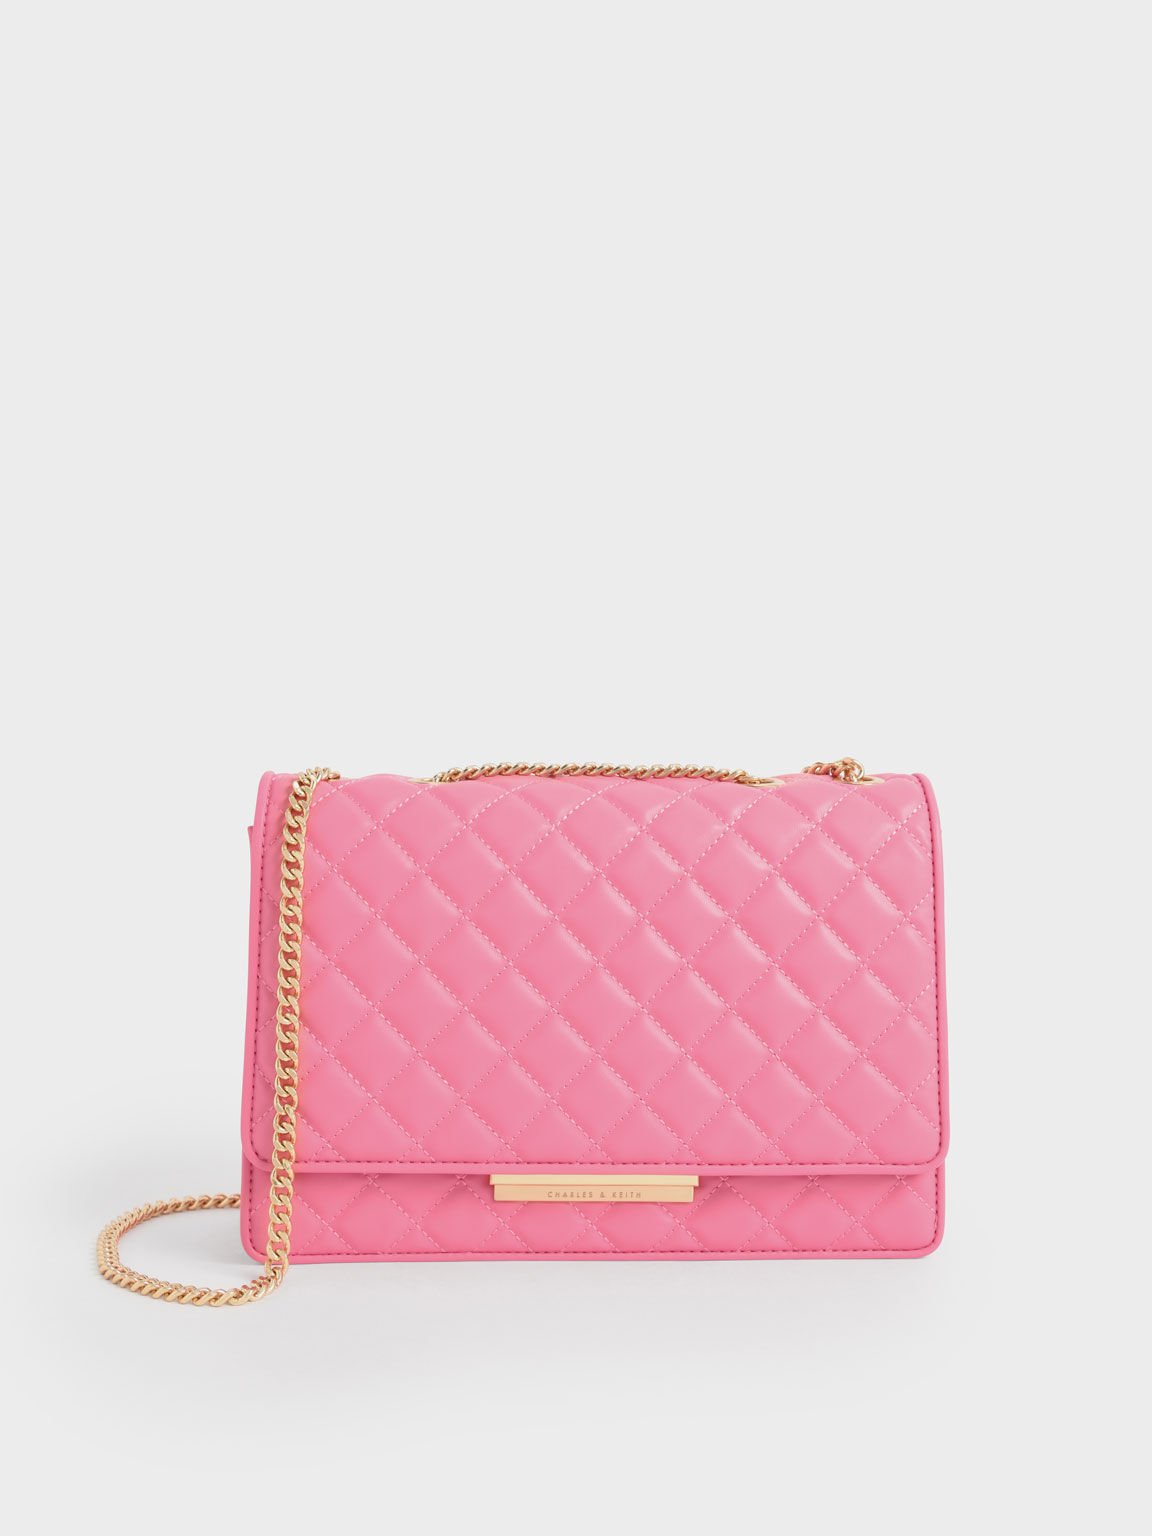 Quilted Hot Pink Small Purse w/ Gold Chain Straps